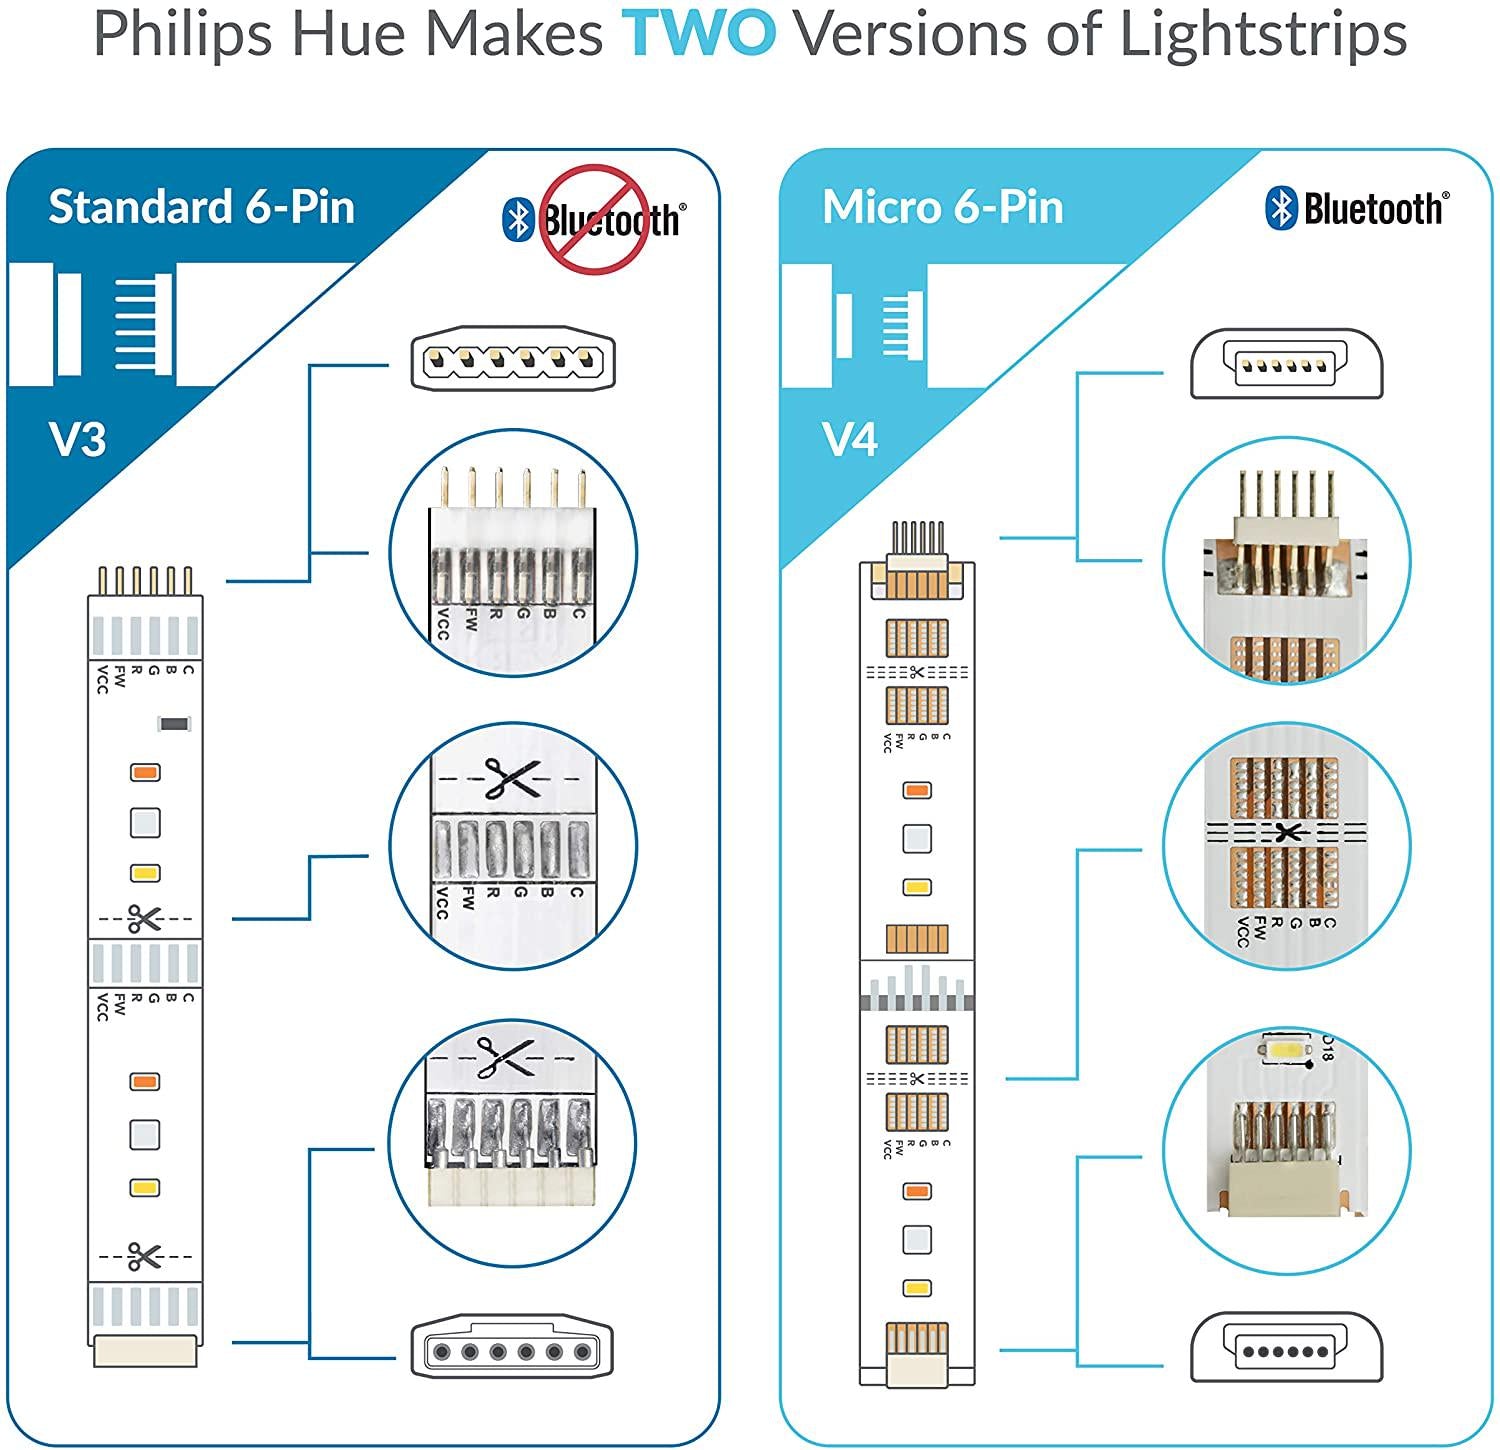 Litcessory, Litcessory Extension Cable for Philips Hue Lightstrip Plus (1m, 2 Pack, White - Micro 6-PIN V4)